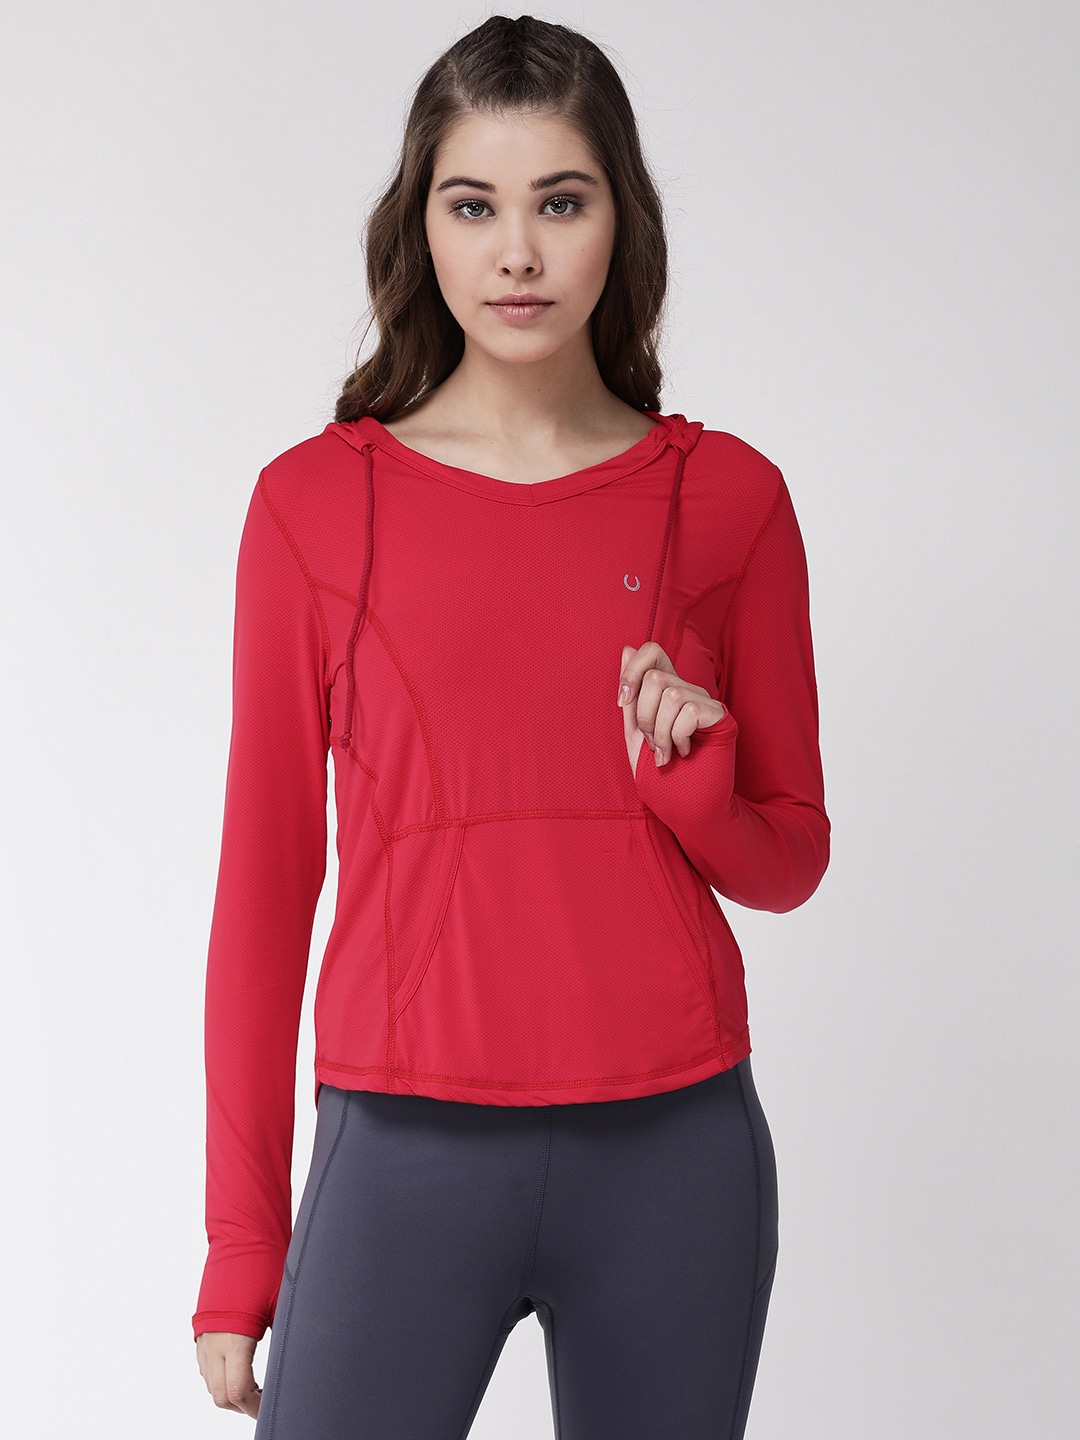 Fitkin Women Red Self Design Hood Training T-shirt Price in India